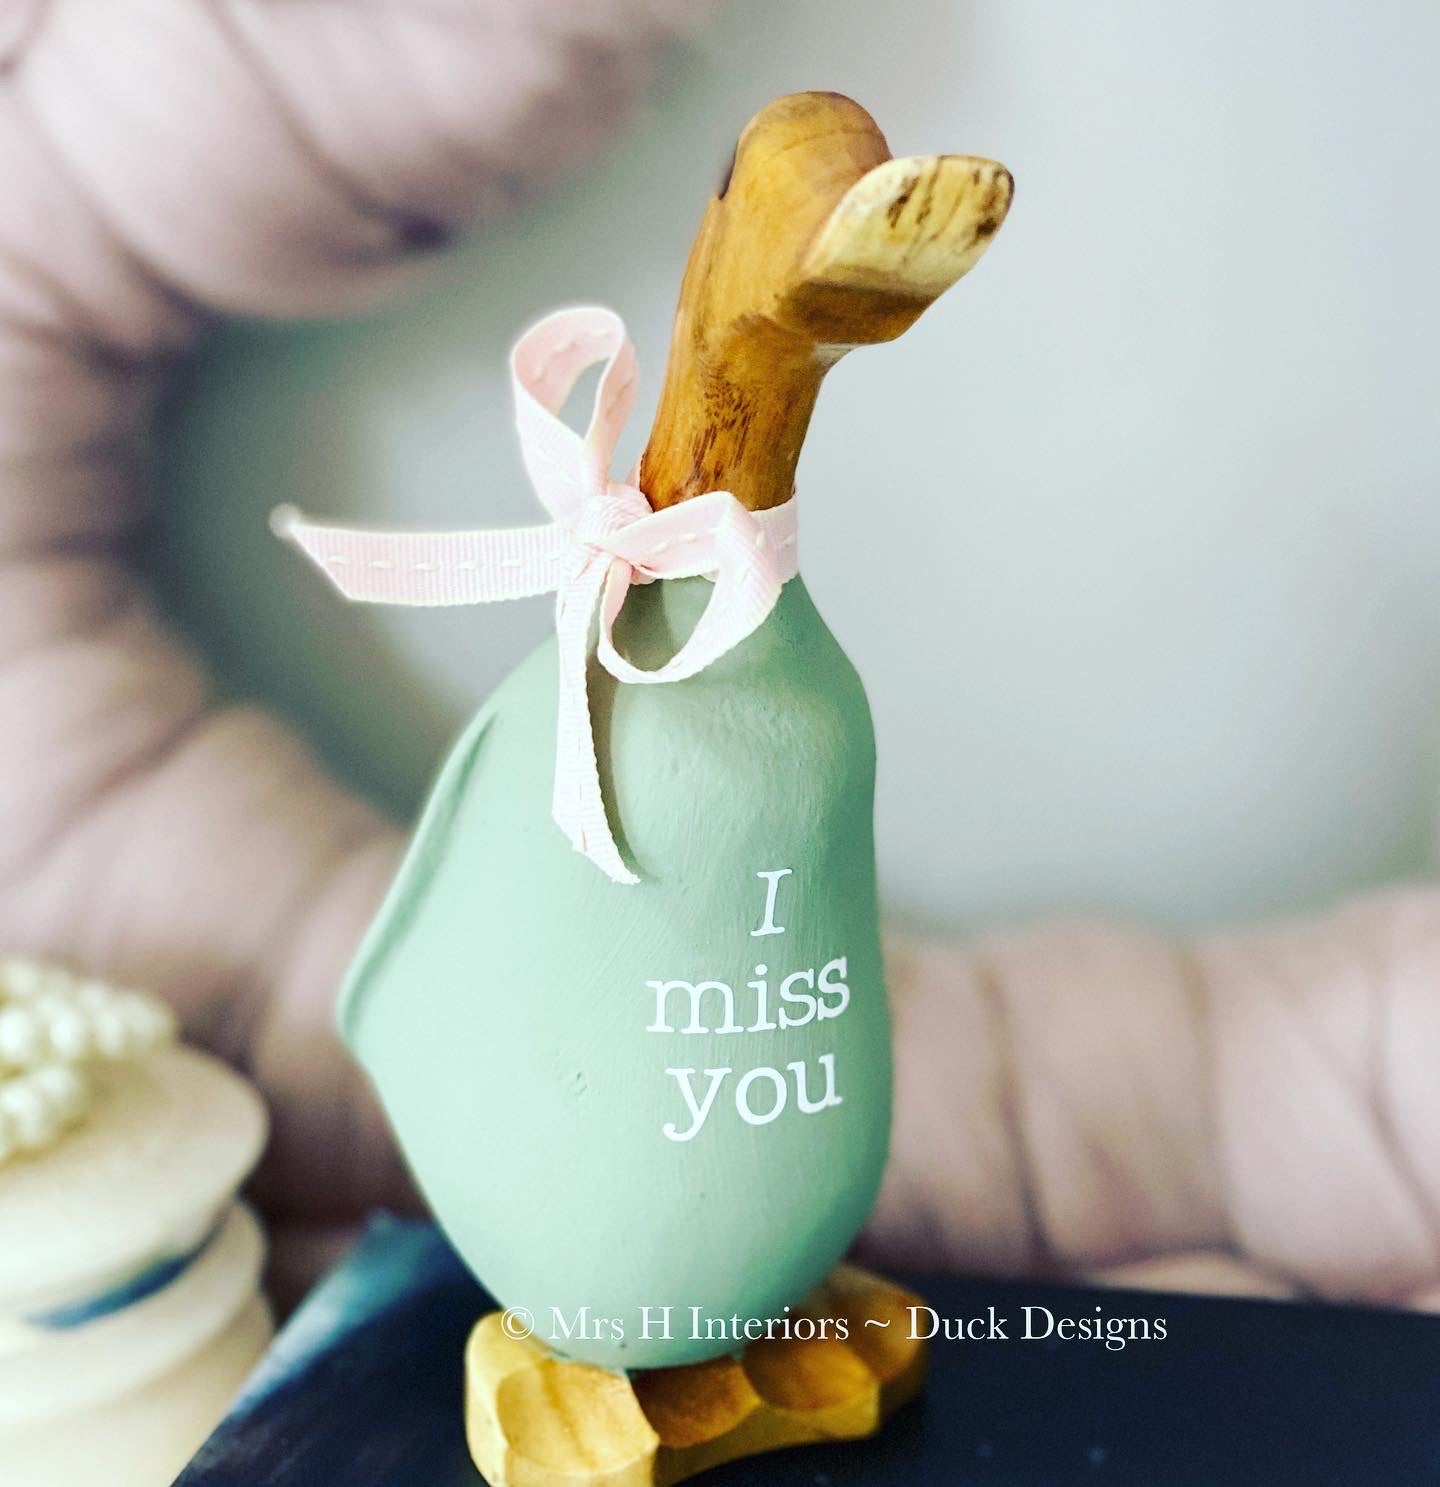 I miss you - Decorated Wooden Duck in Boots by Mrs H the Duck Lady